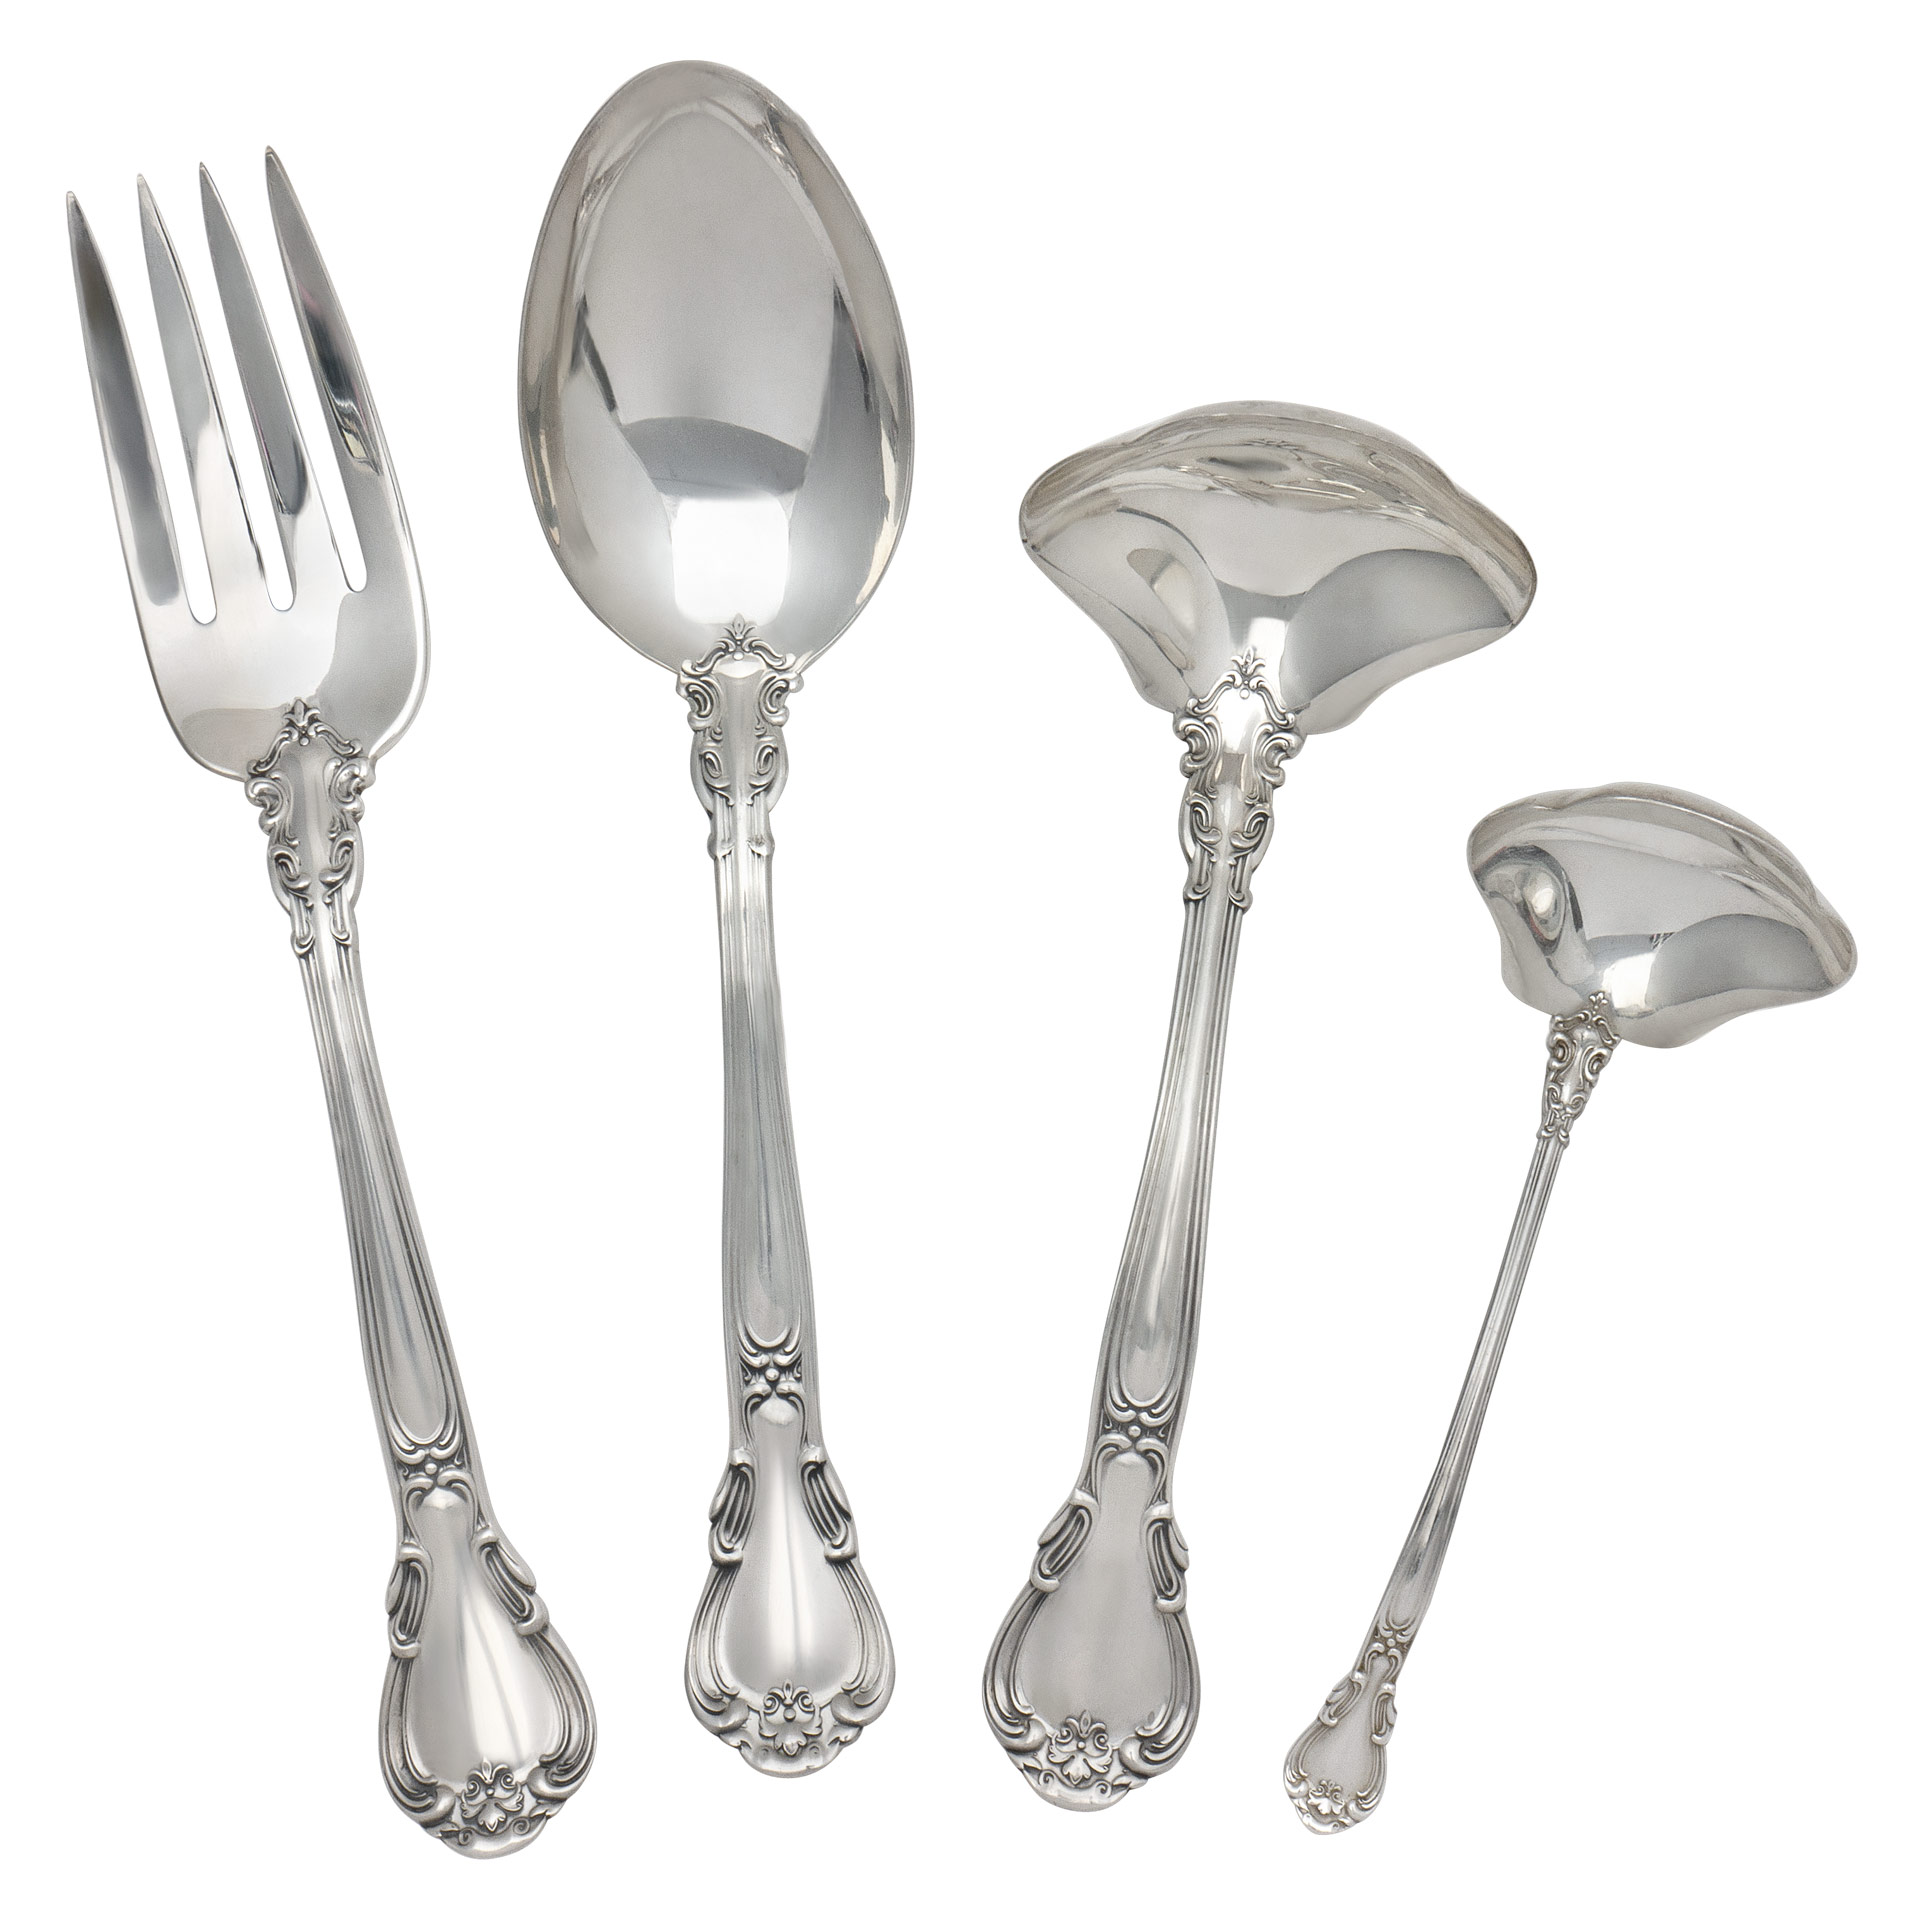 Gorham Chantilly Sterling Silver Place Setting 